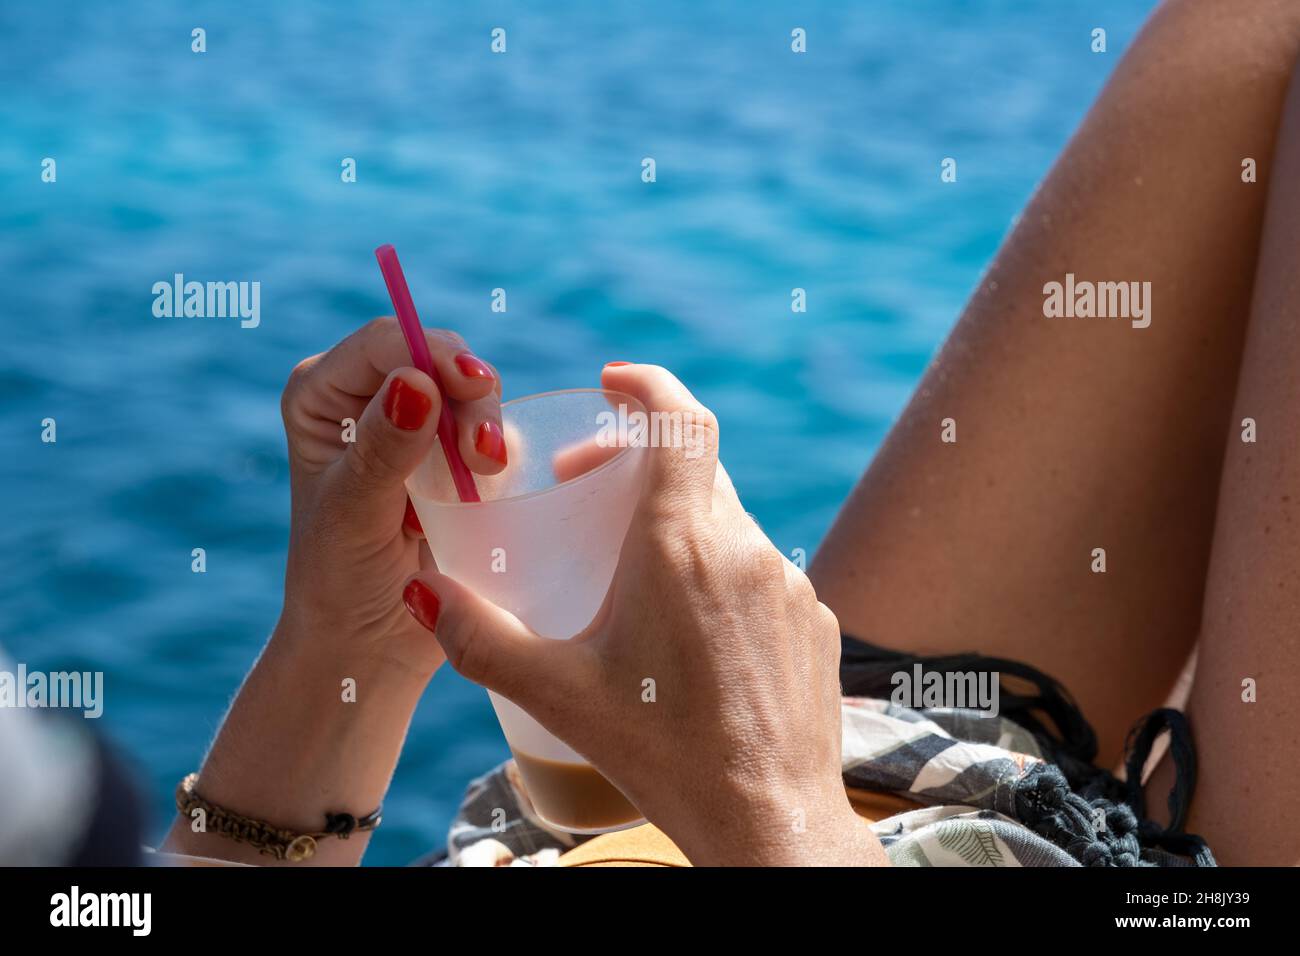 https://c8.alamy.com/comp/2H8JY39/womans-hand-holding-the-cocktail-glass-by-the-beach-2H8JY39.jpg